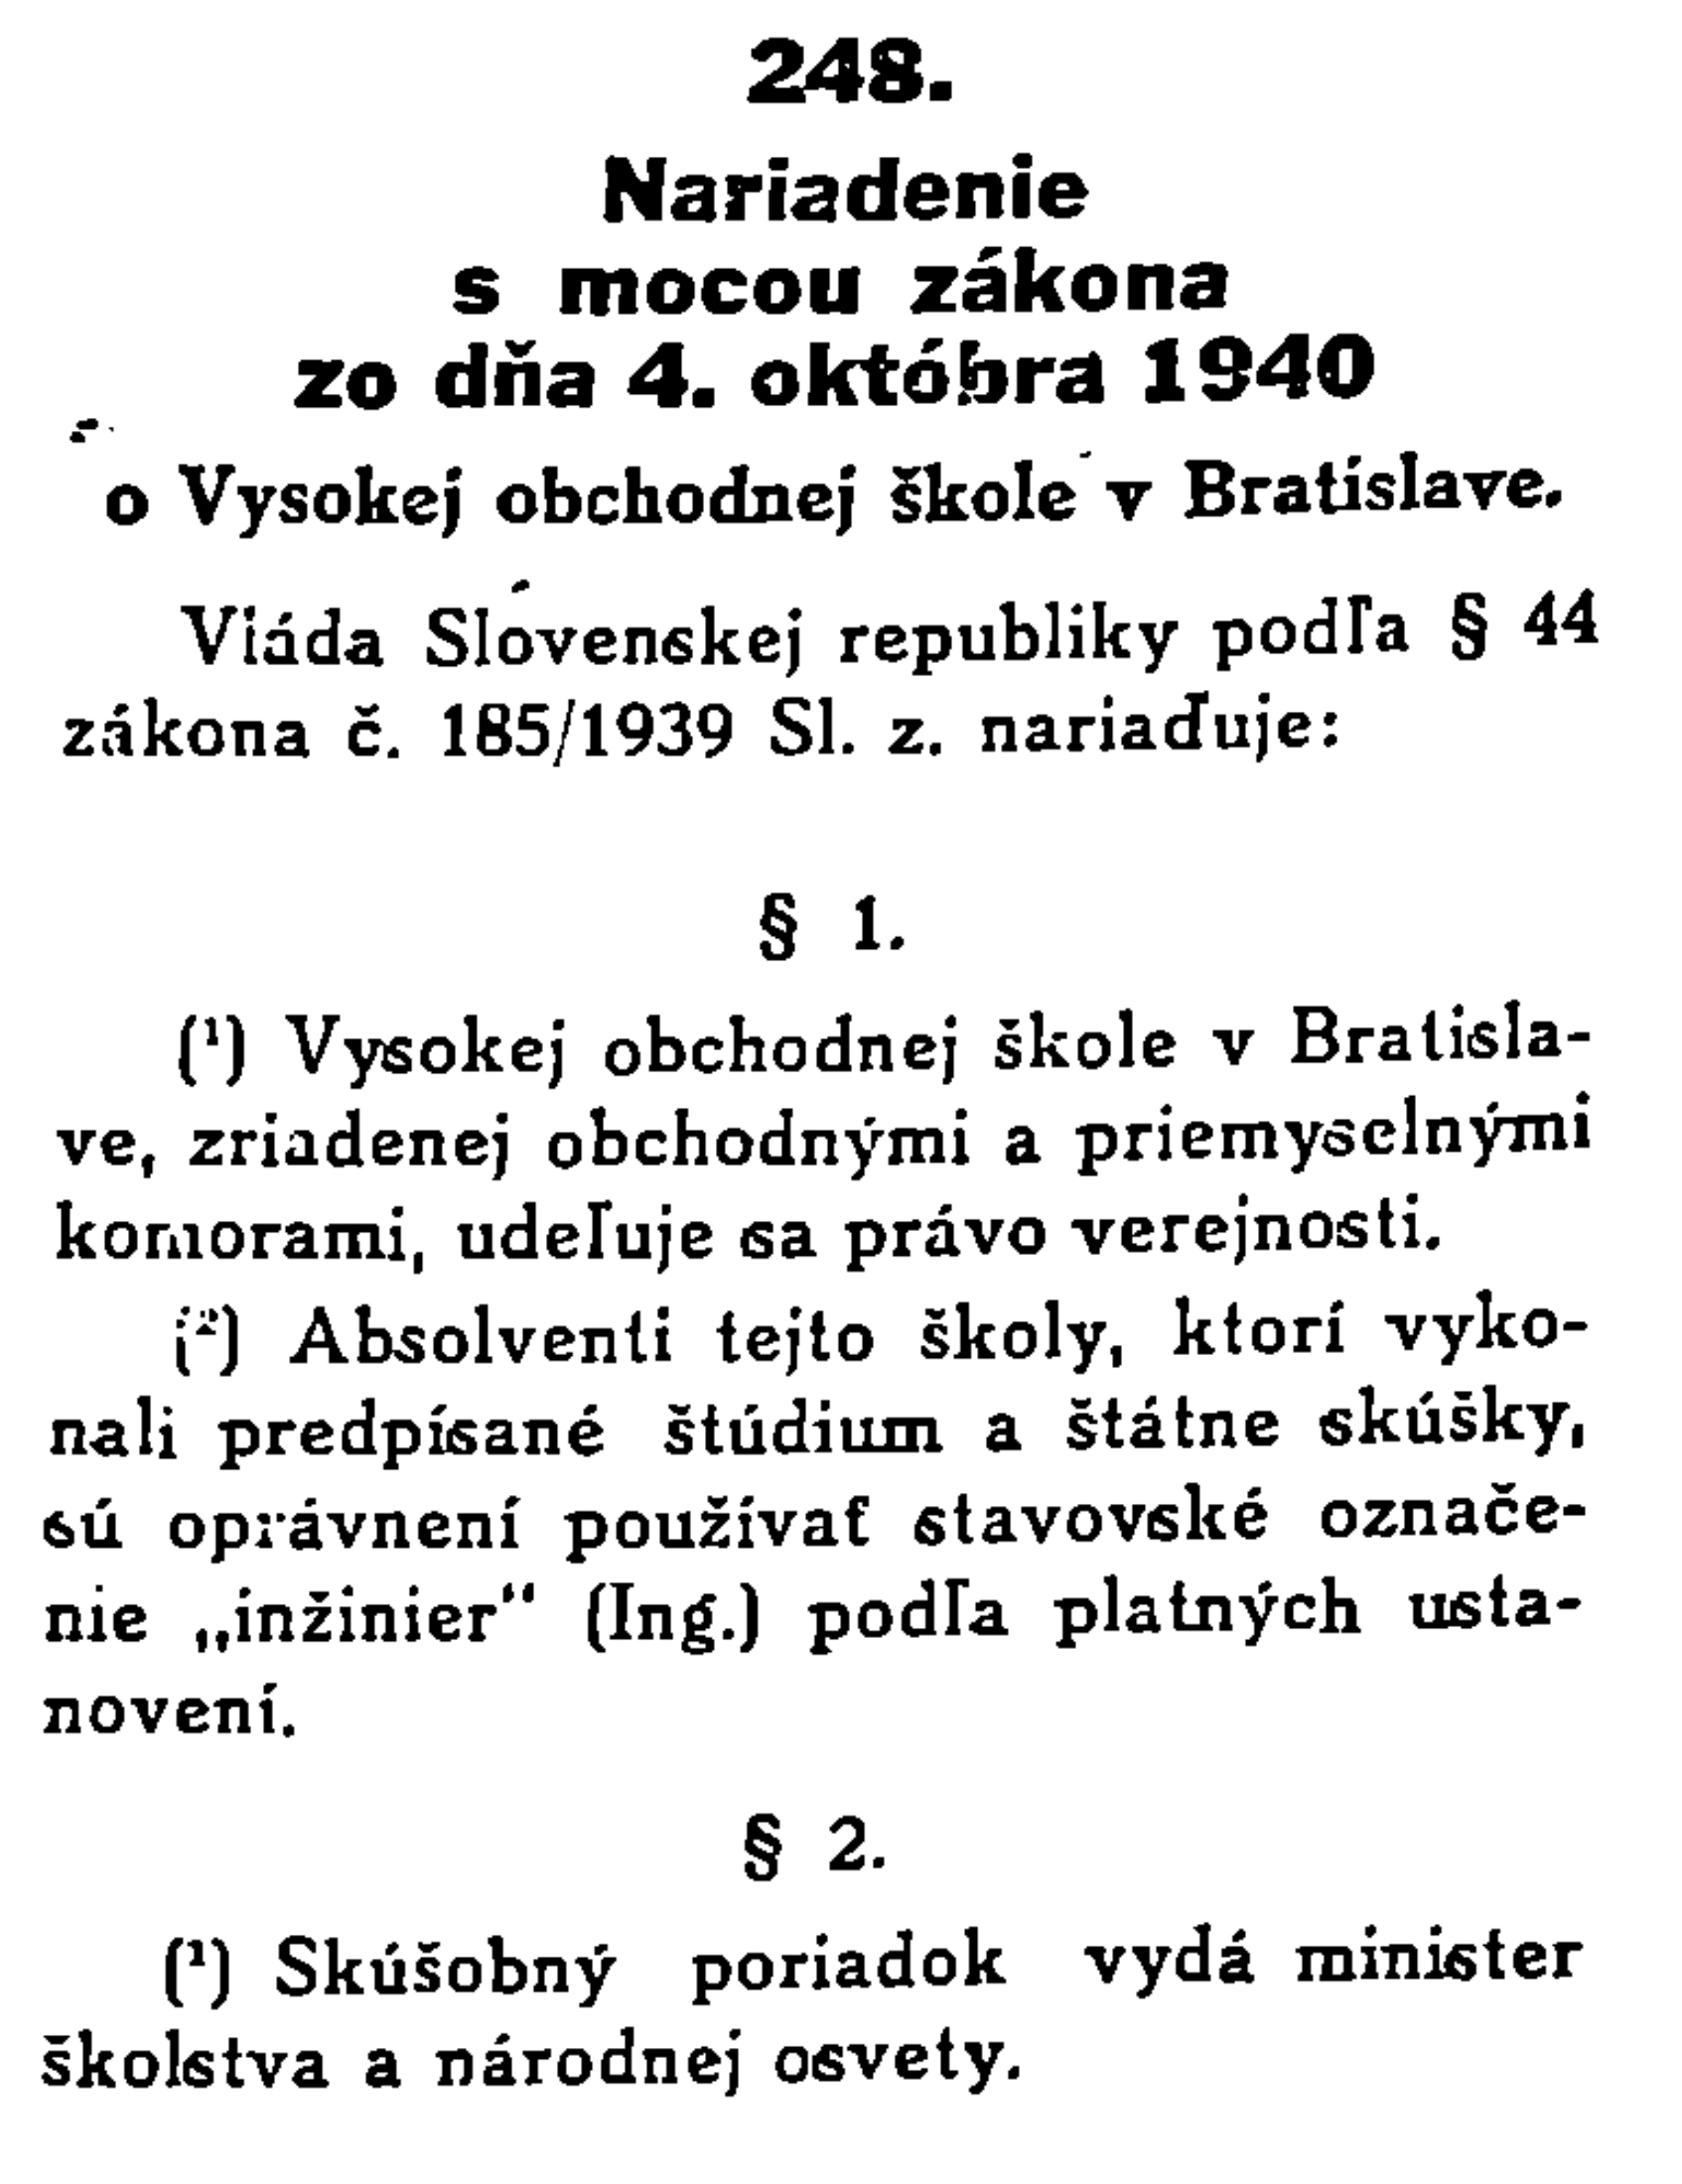 Regulation with the force of law No. 248/Slovak Code dated October 4, 1940